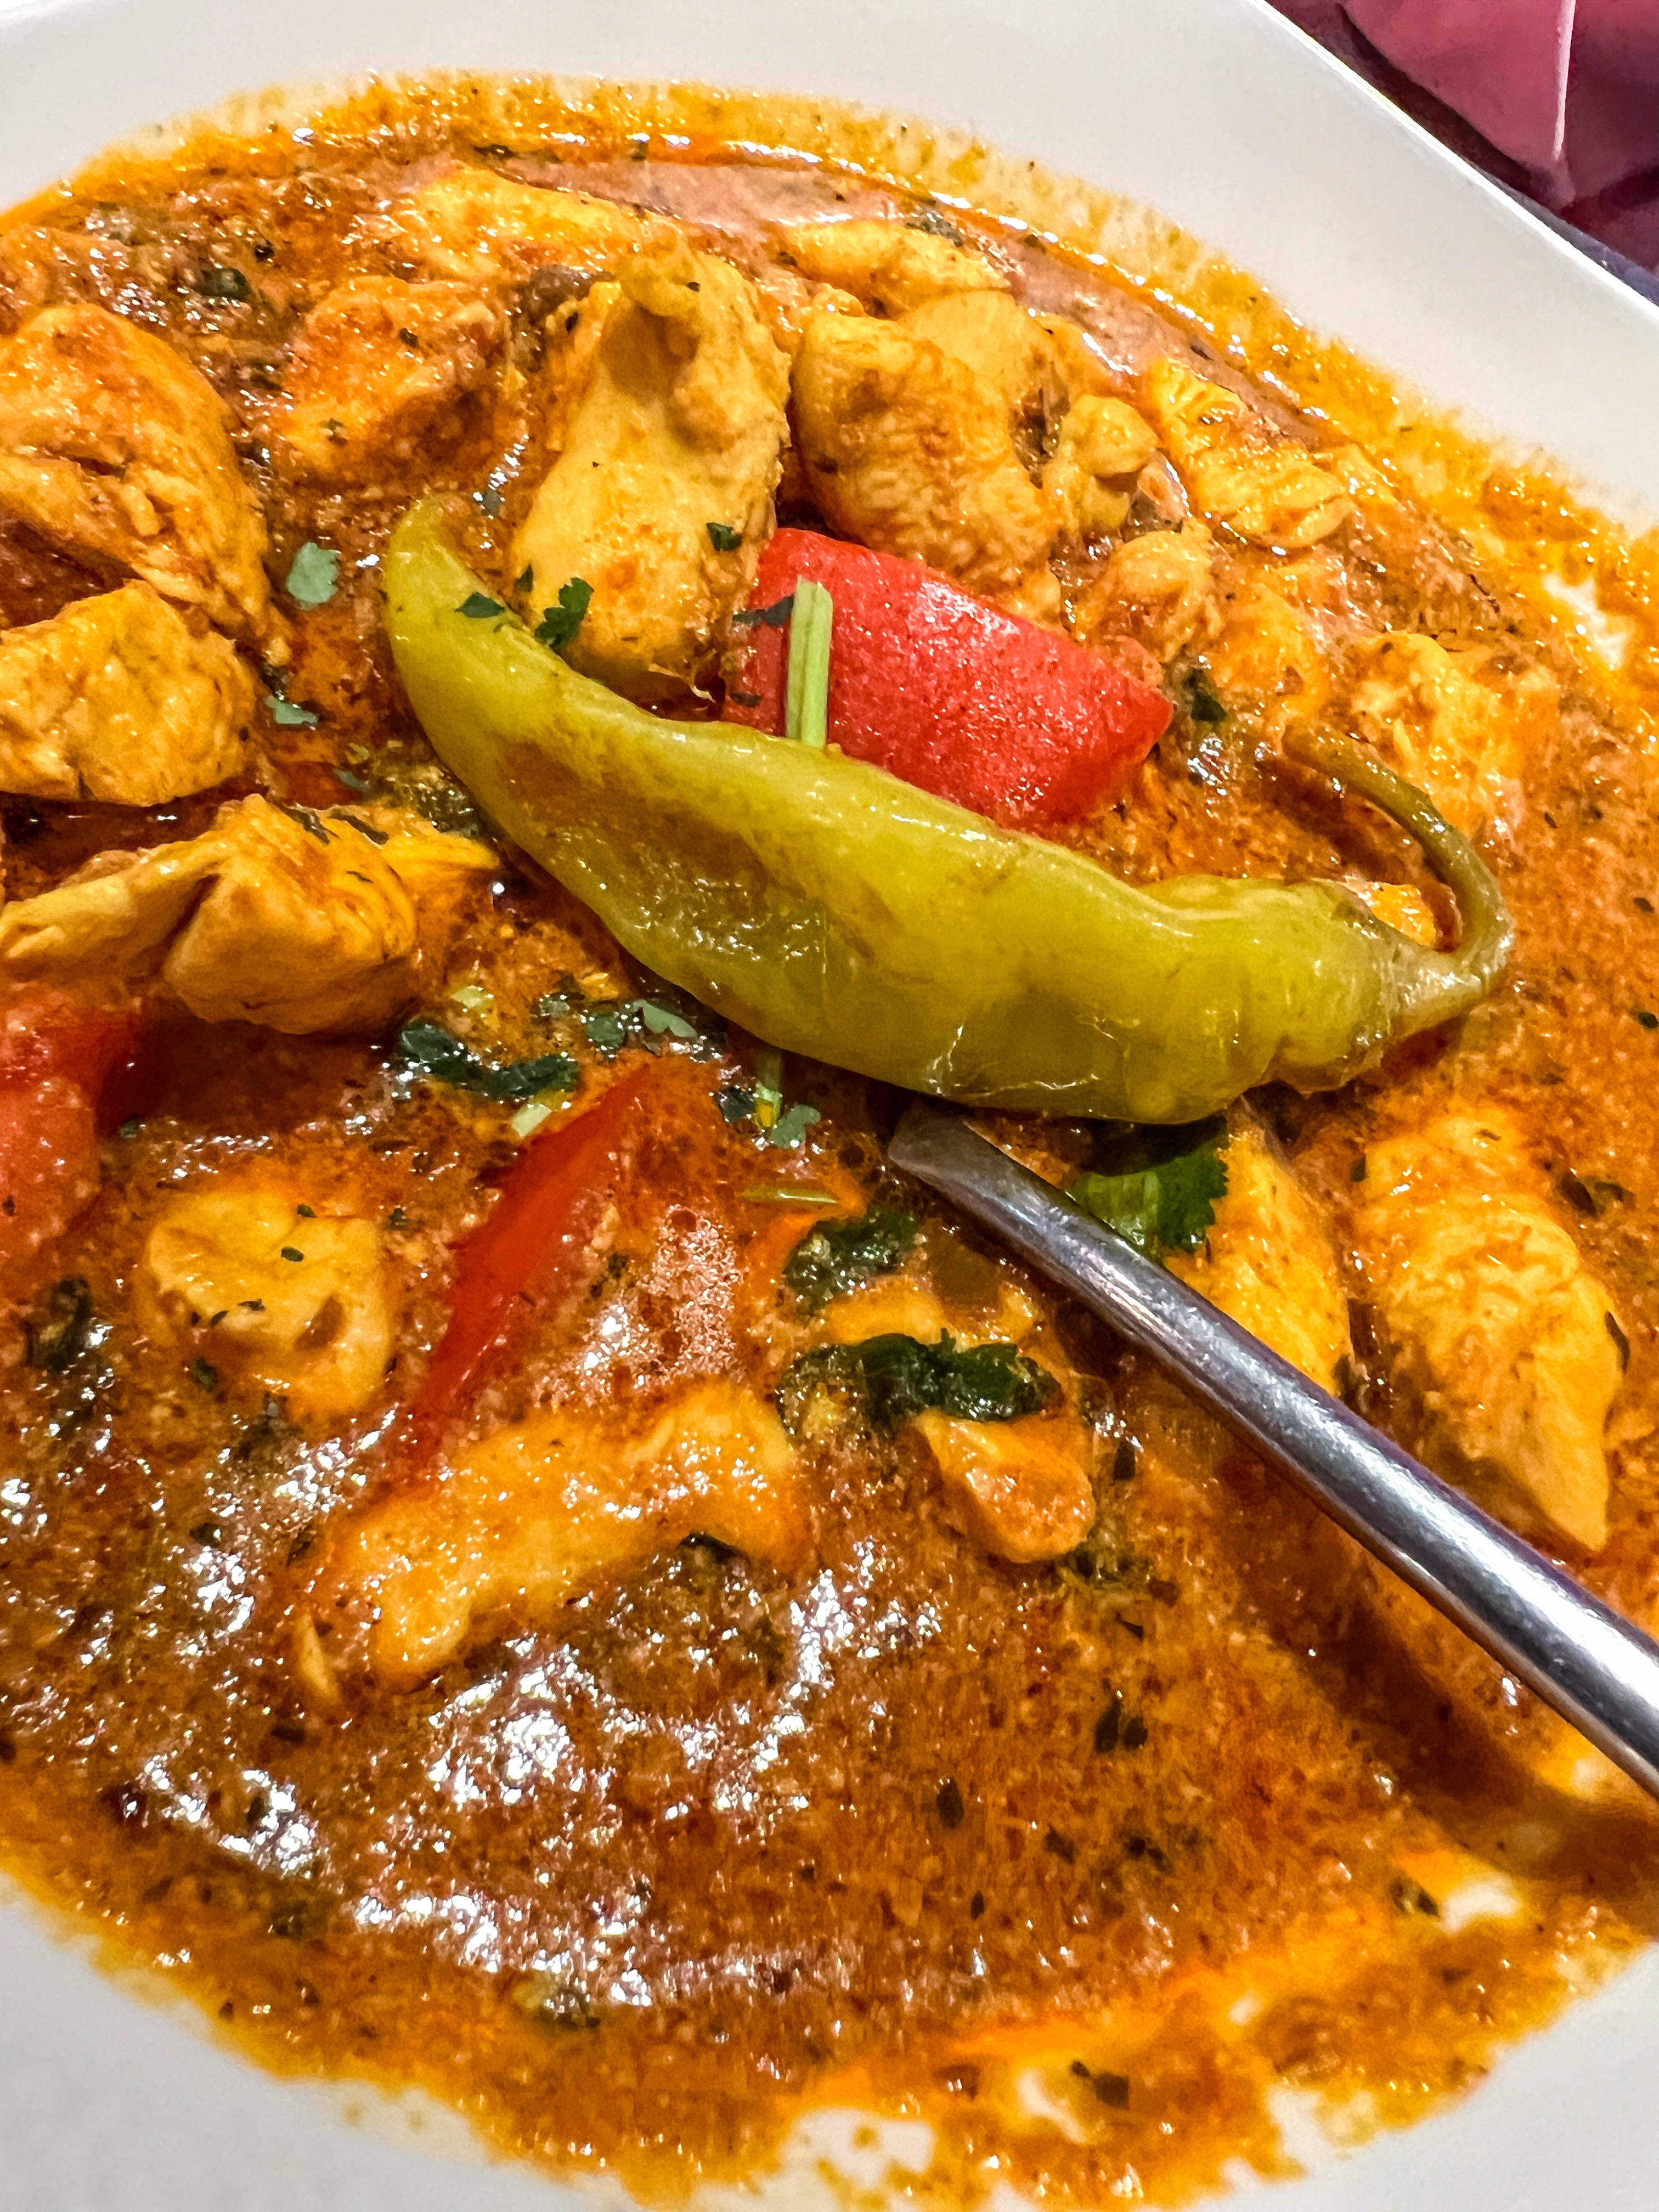 Birmingham is famous for the amount of restaurants cooking in the Balti style (Alamy/PA)